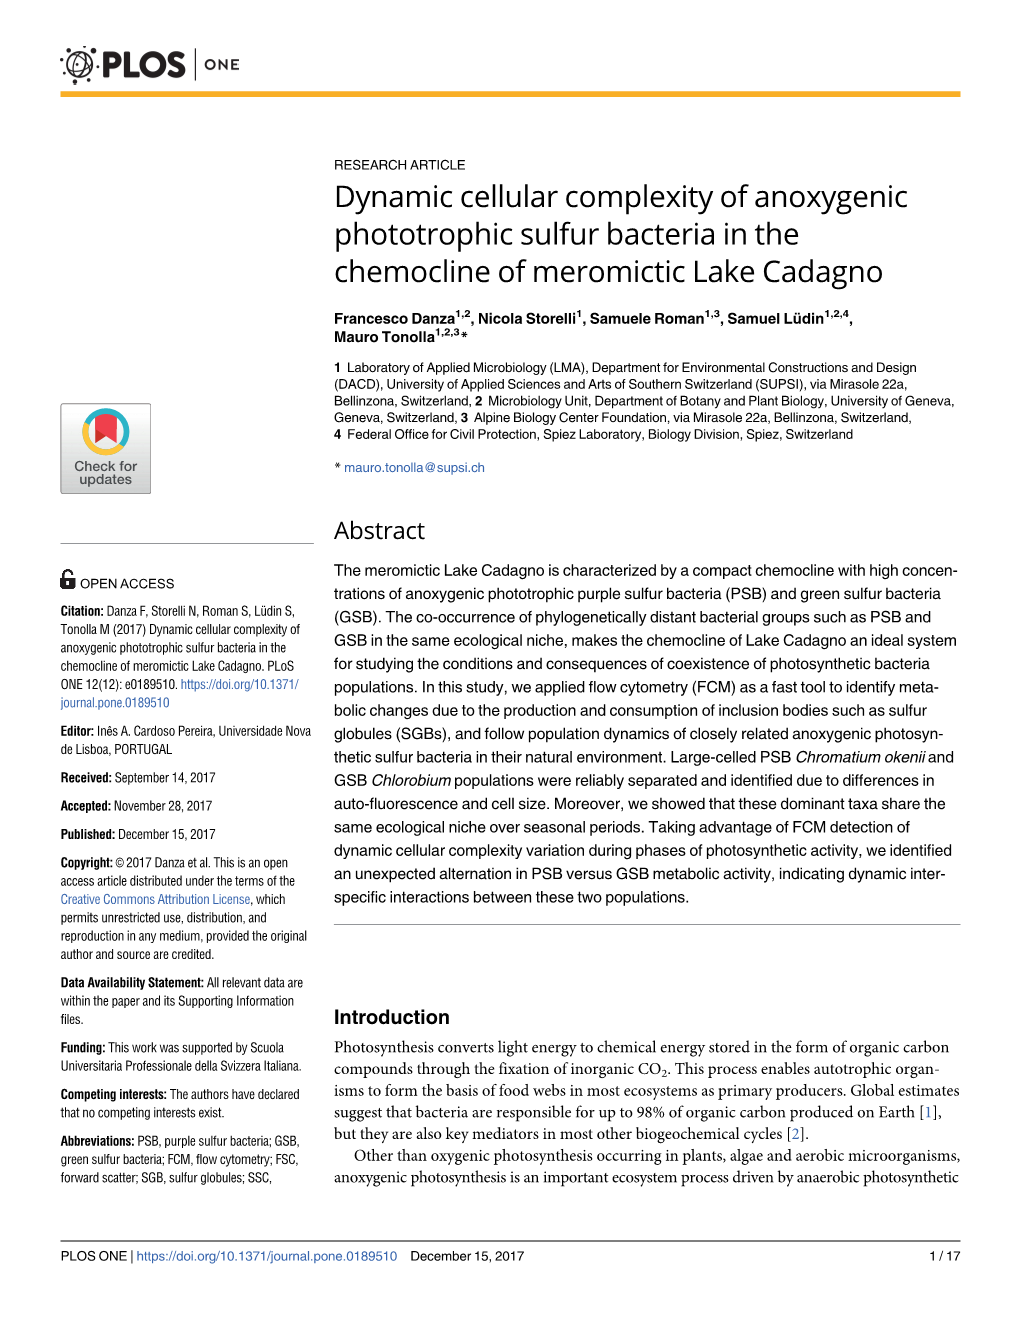 Dynamic Cellular Complexity of Anoxygenic Phototrophic Sulfur Bacteria in the Chemocline of Meromictic Lake Cadagno